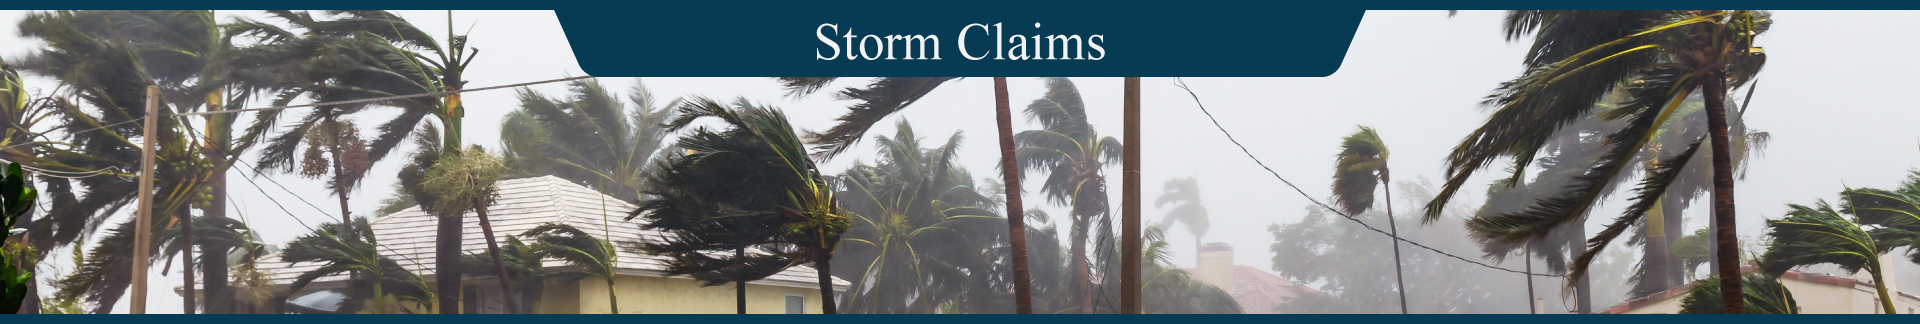 Storm Claims The Peña Law Firm